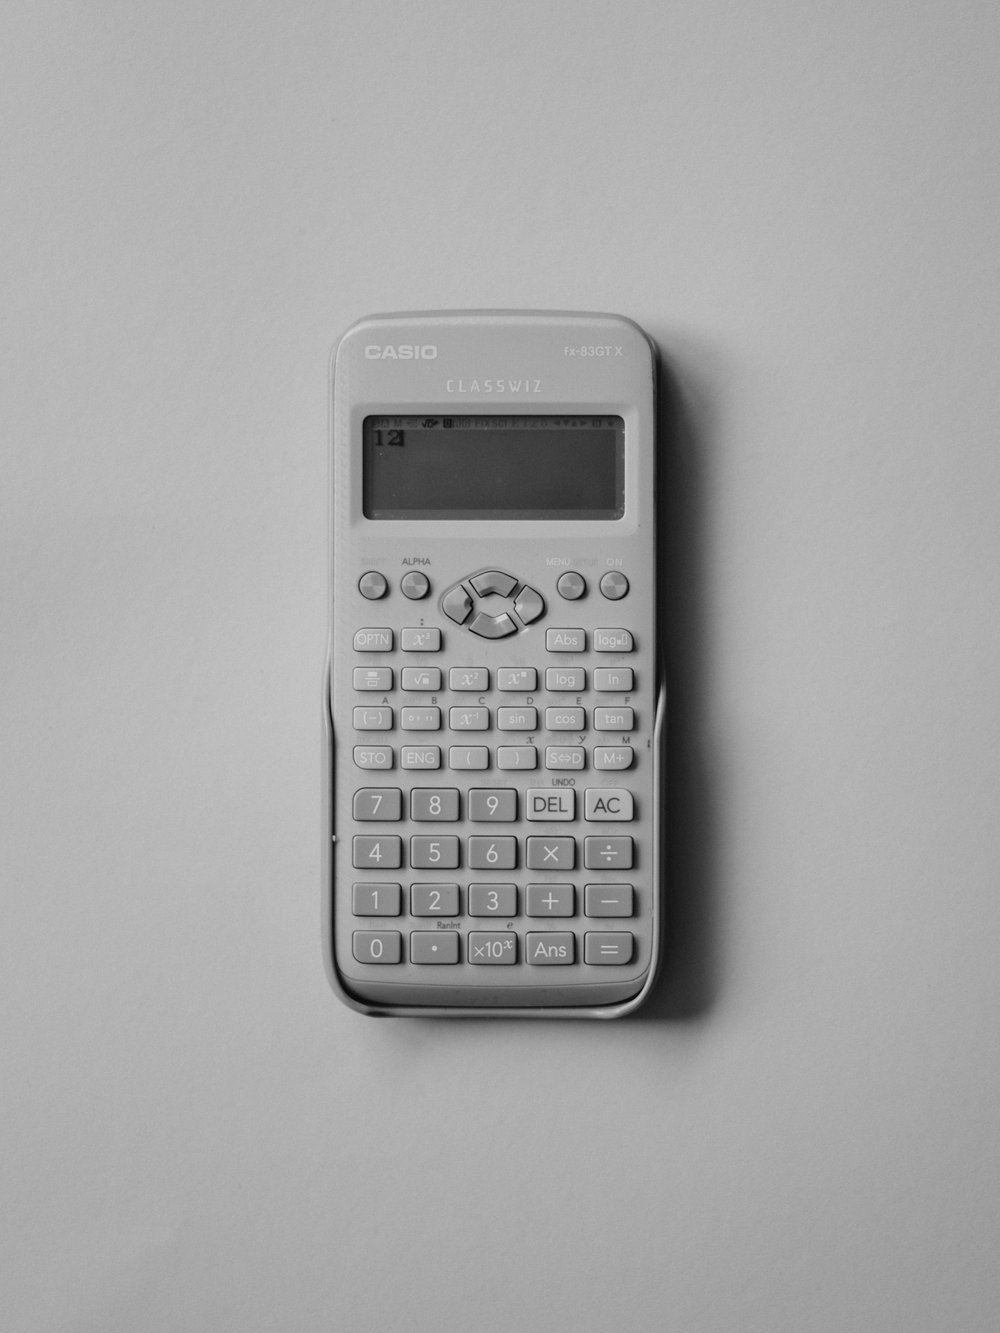 A black and white image of a T9 calculator 